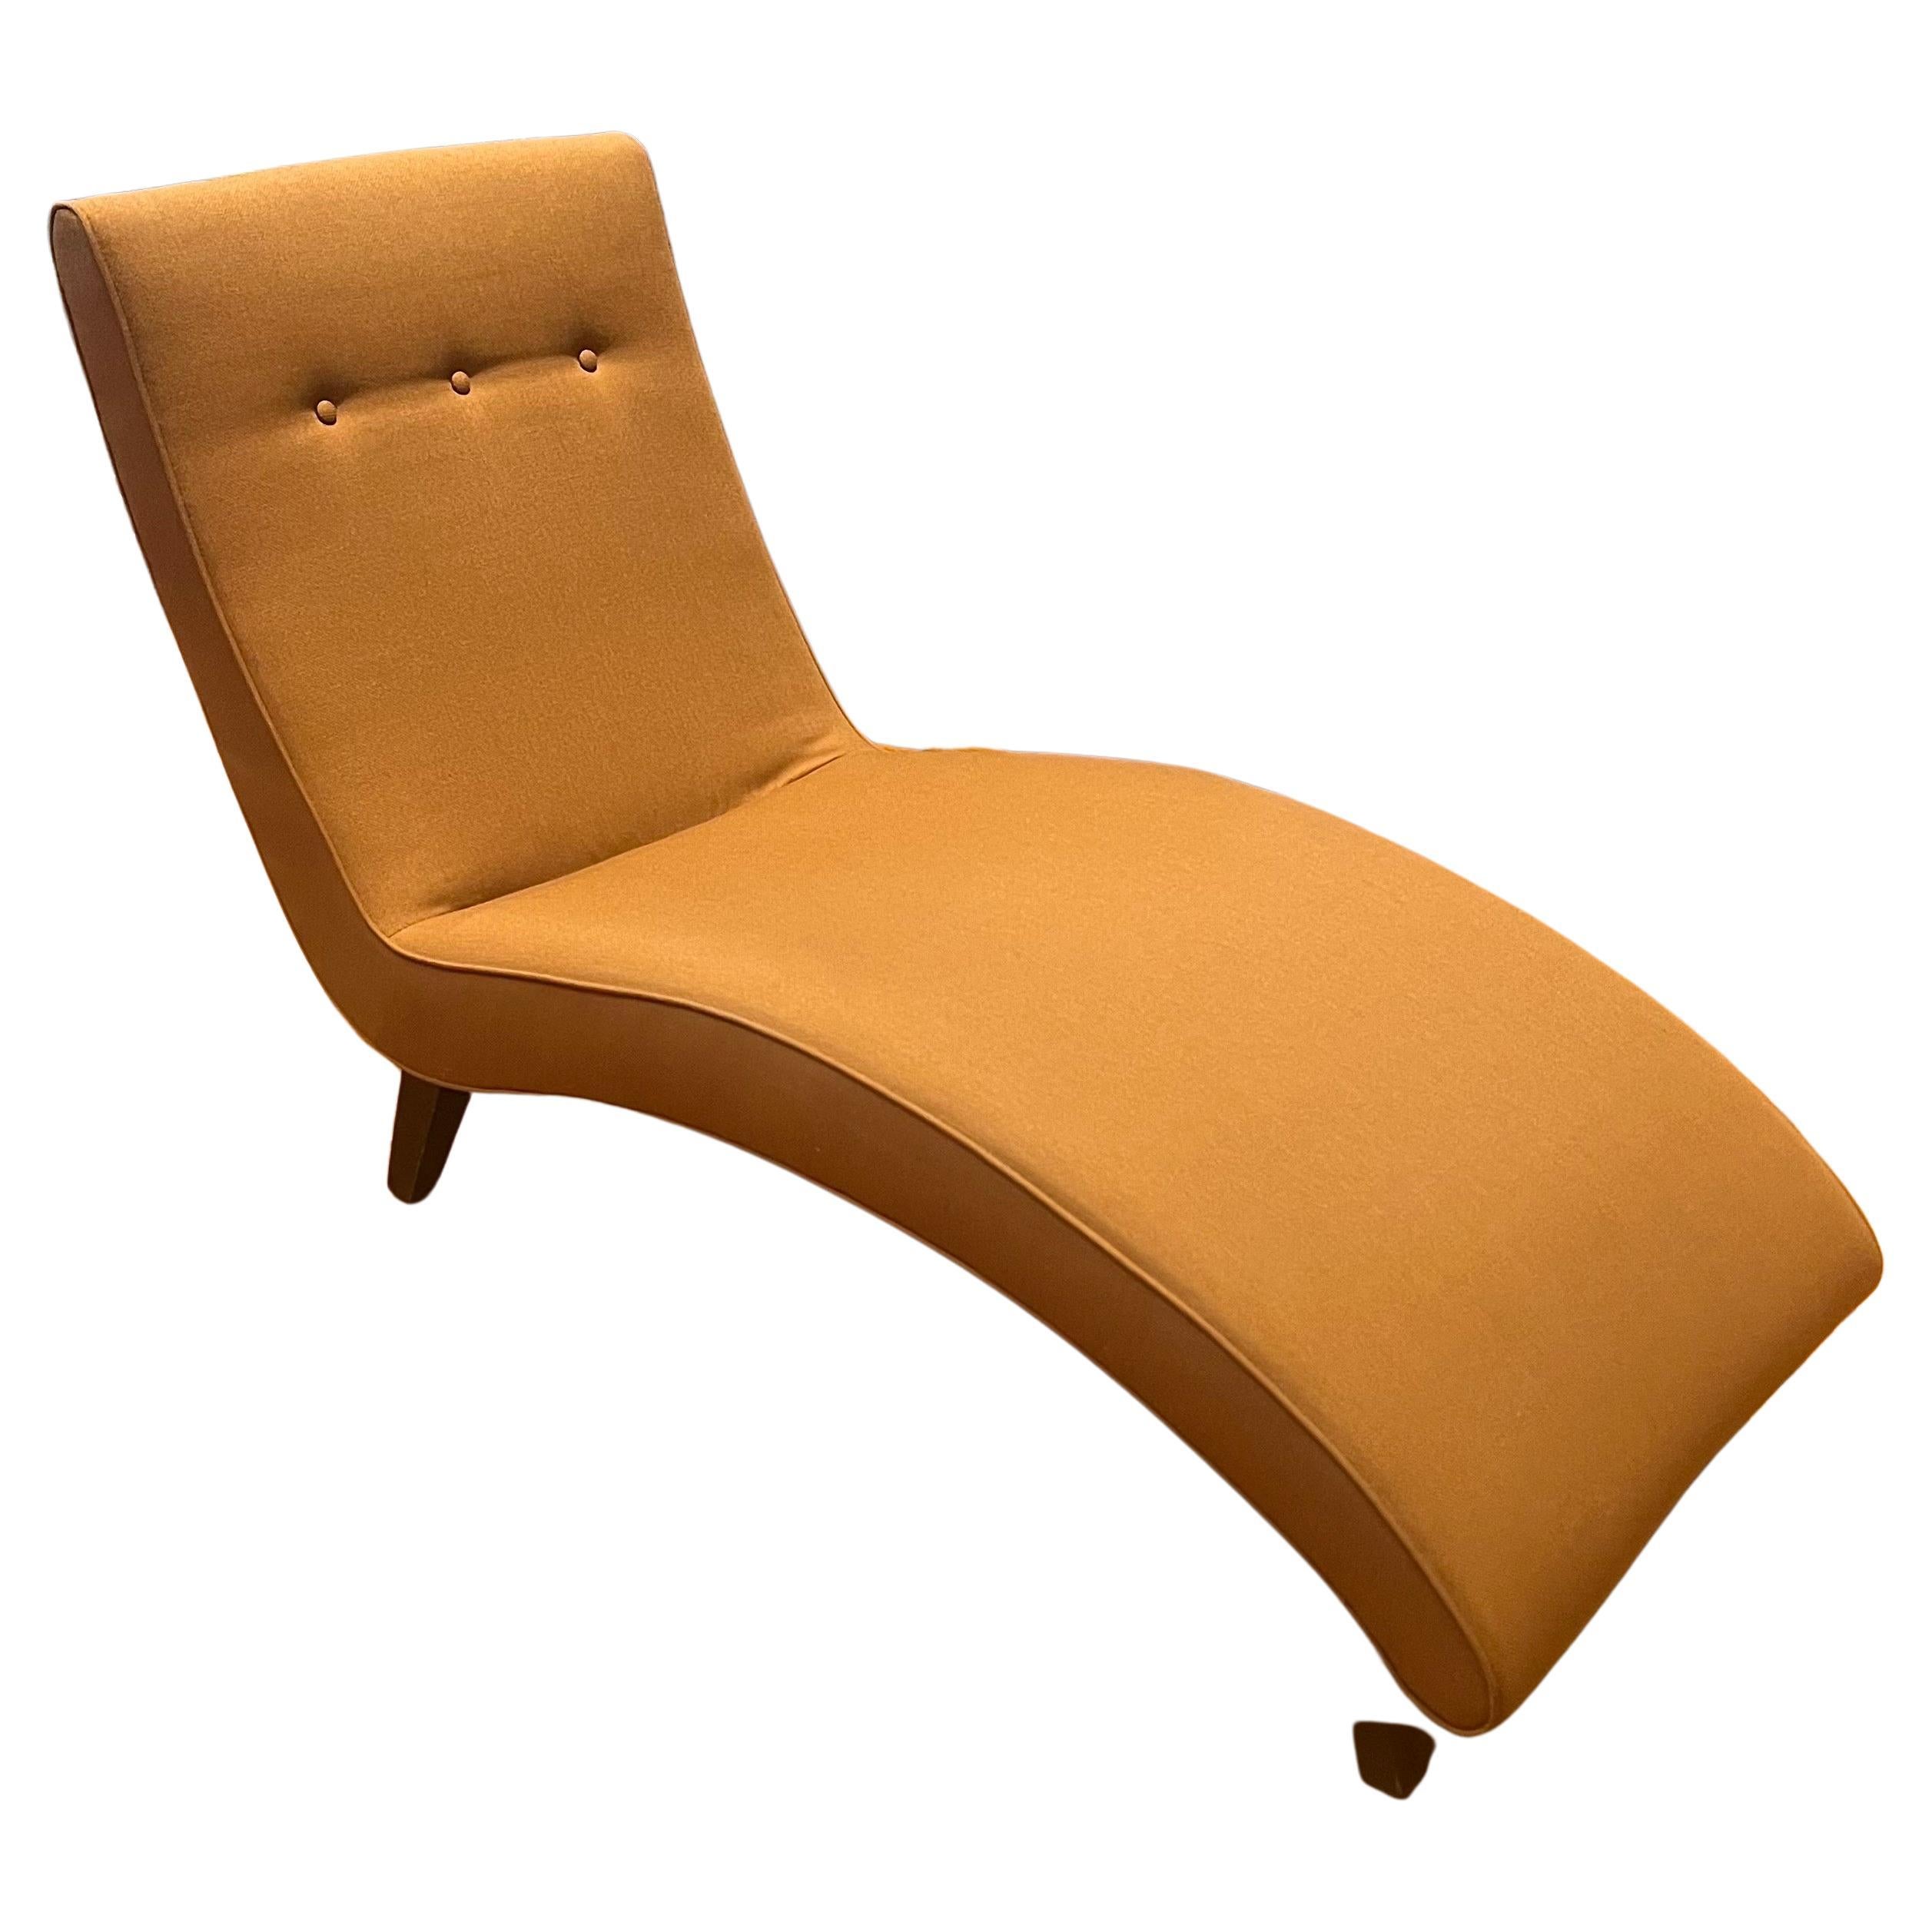 Contemporary chaise Lounge in Rust Fabric by Room and Board